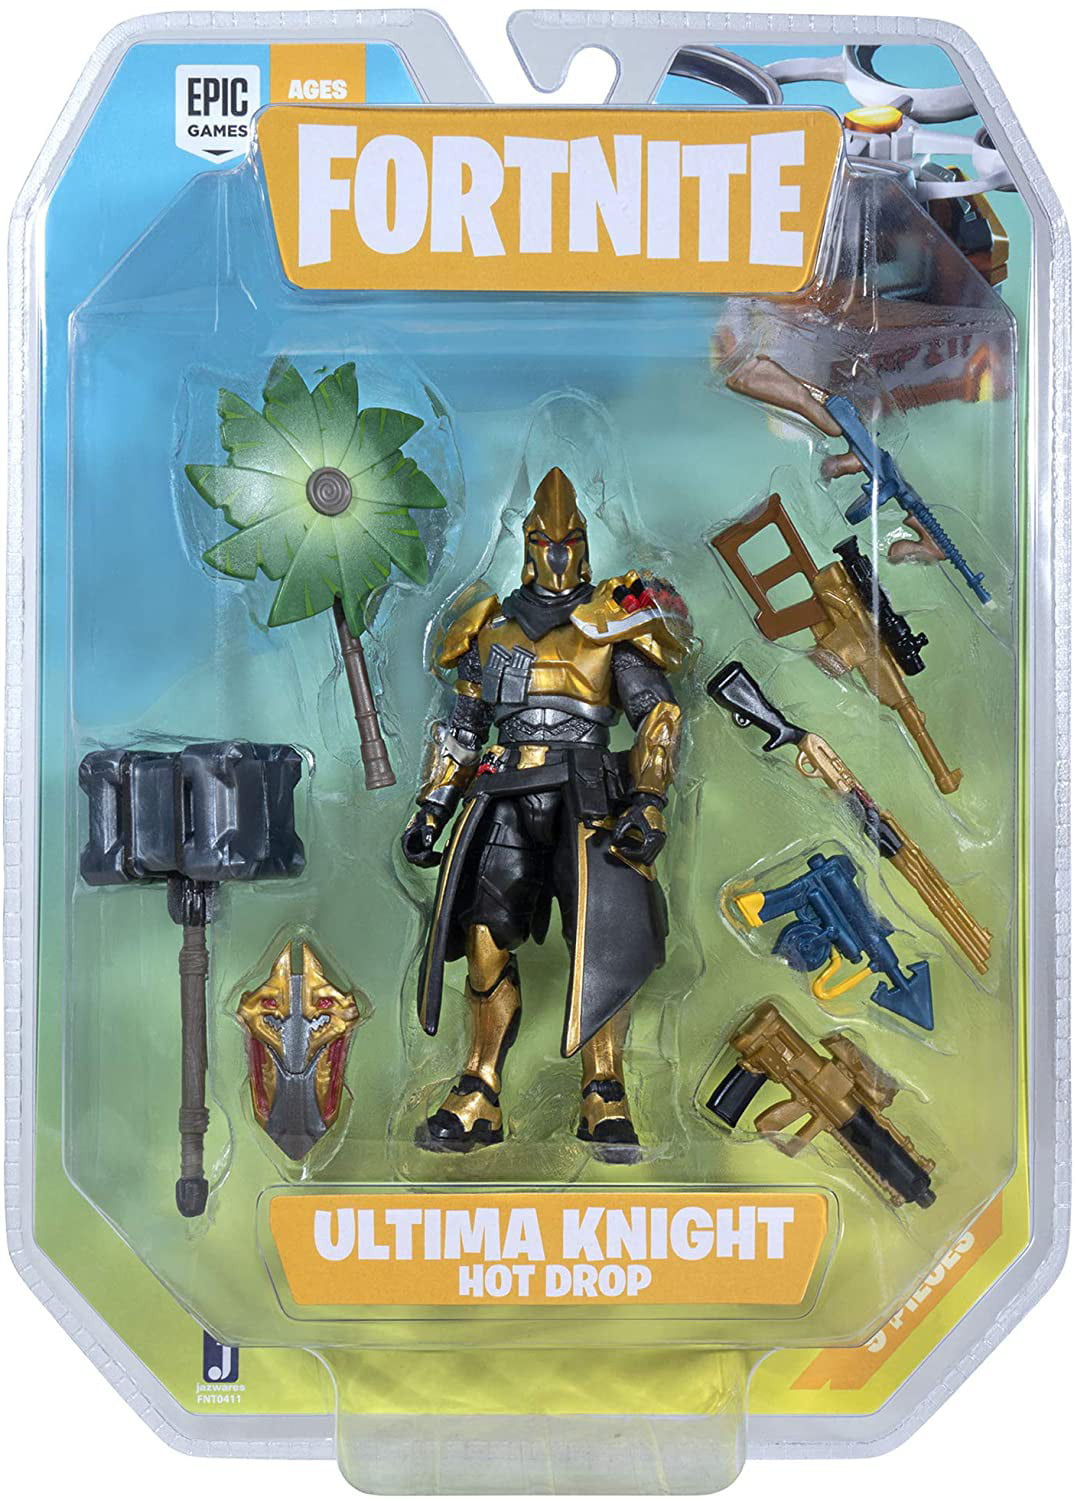 Fortnite Ultima Knight Hot Drop Action Figure - 06a8b4fc 1a2f 494a Ba29 961Db6c60b38.4f52e8144c85a71c5fbcD3e694ace13D